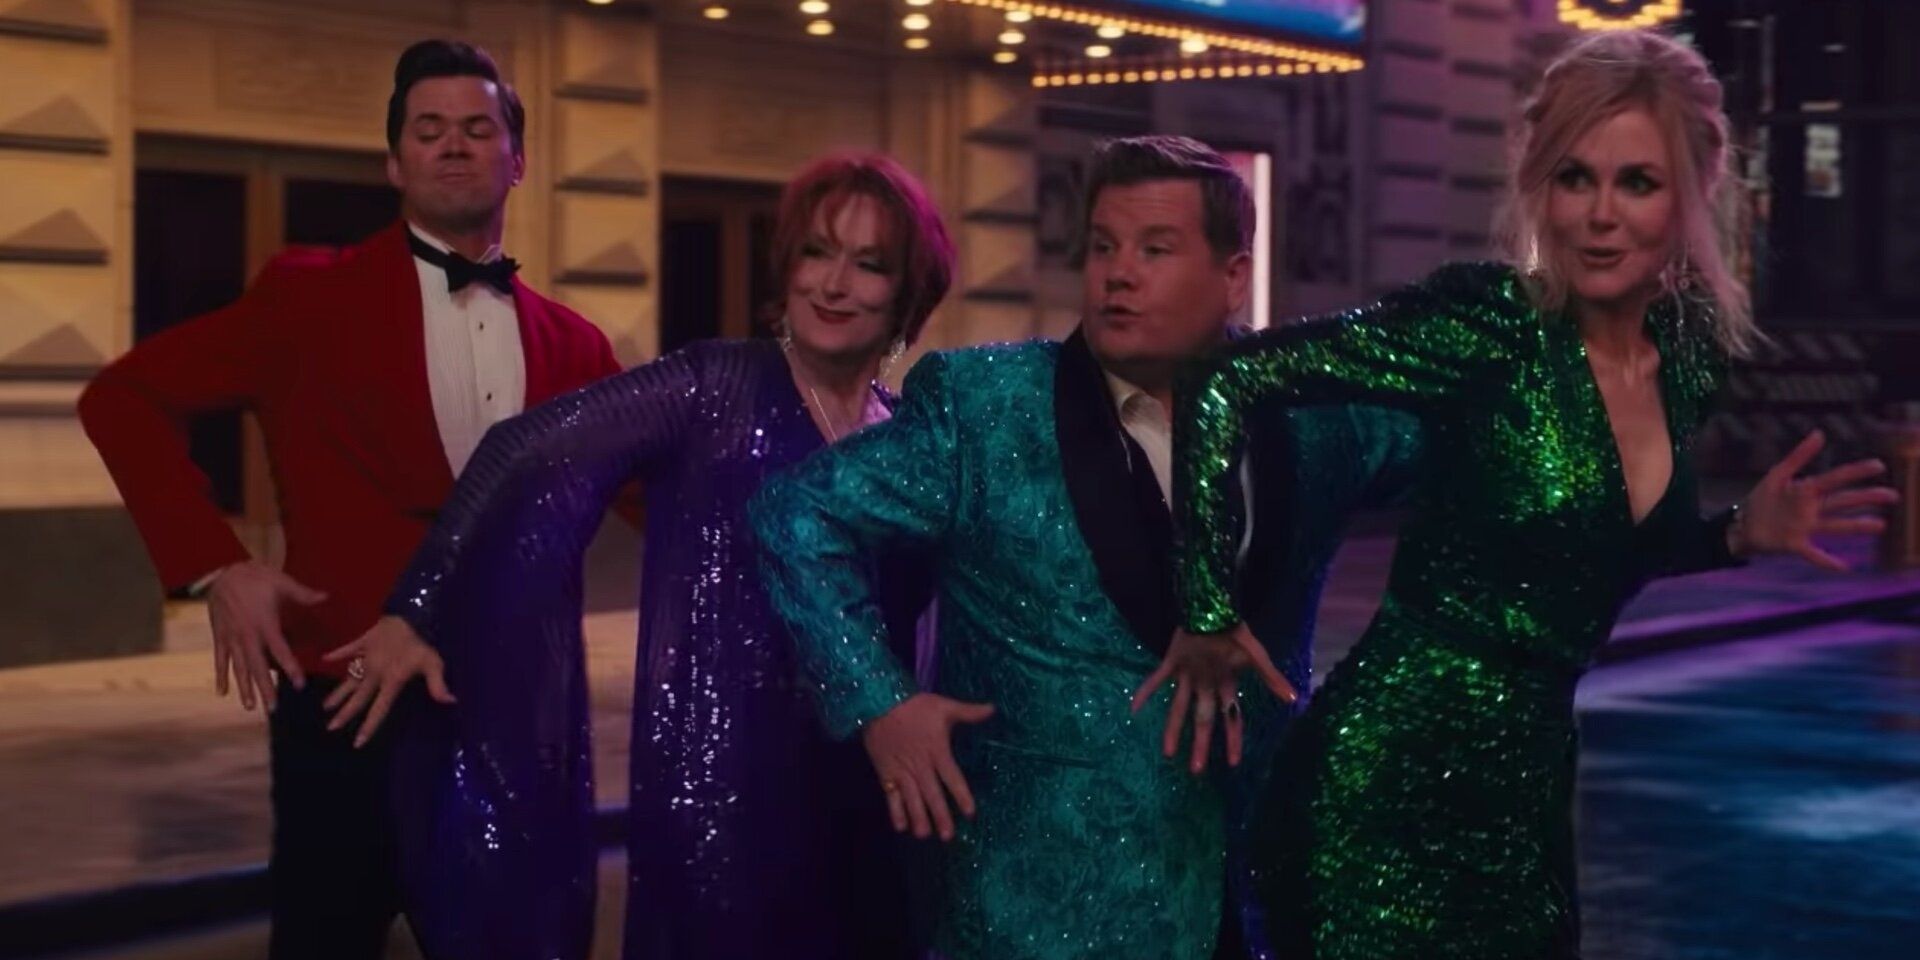 Andrew Rannell as Trent + Meryl Streep as Dee Dee + James Corden as Barry + Nicole Kidman as Angie in The Prom